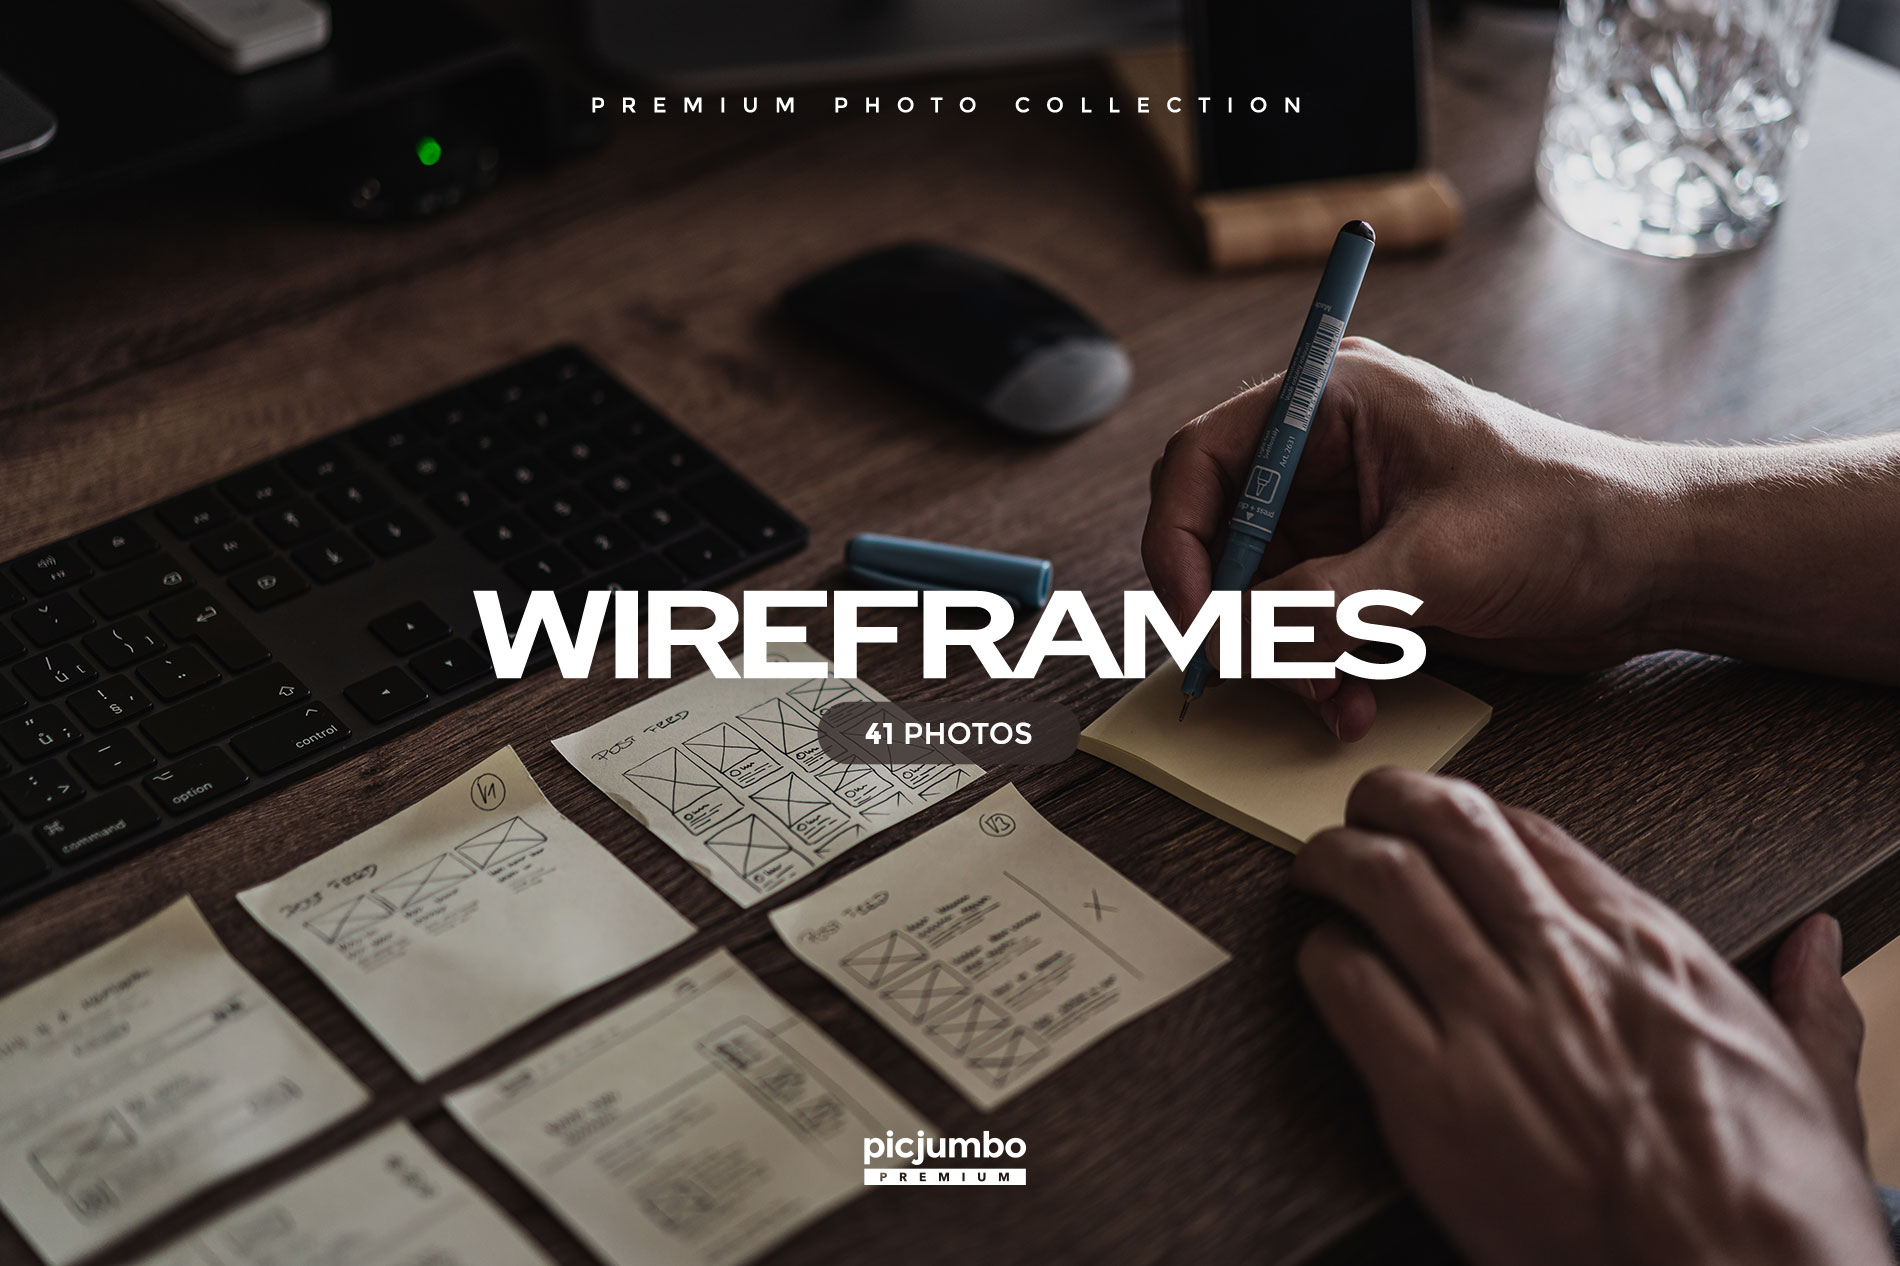 Wireframes Stock Photo Collection